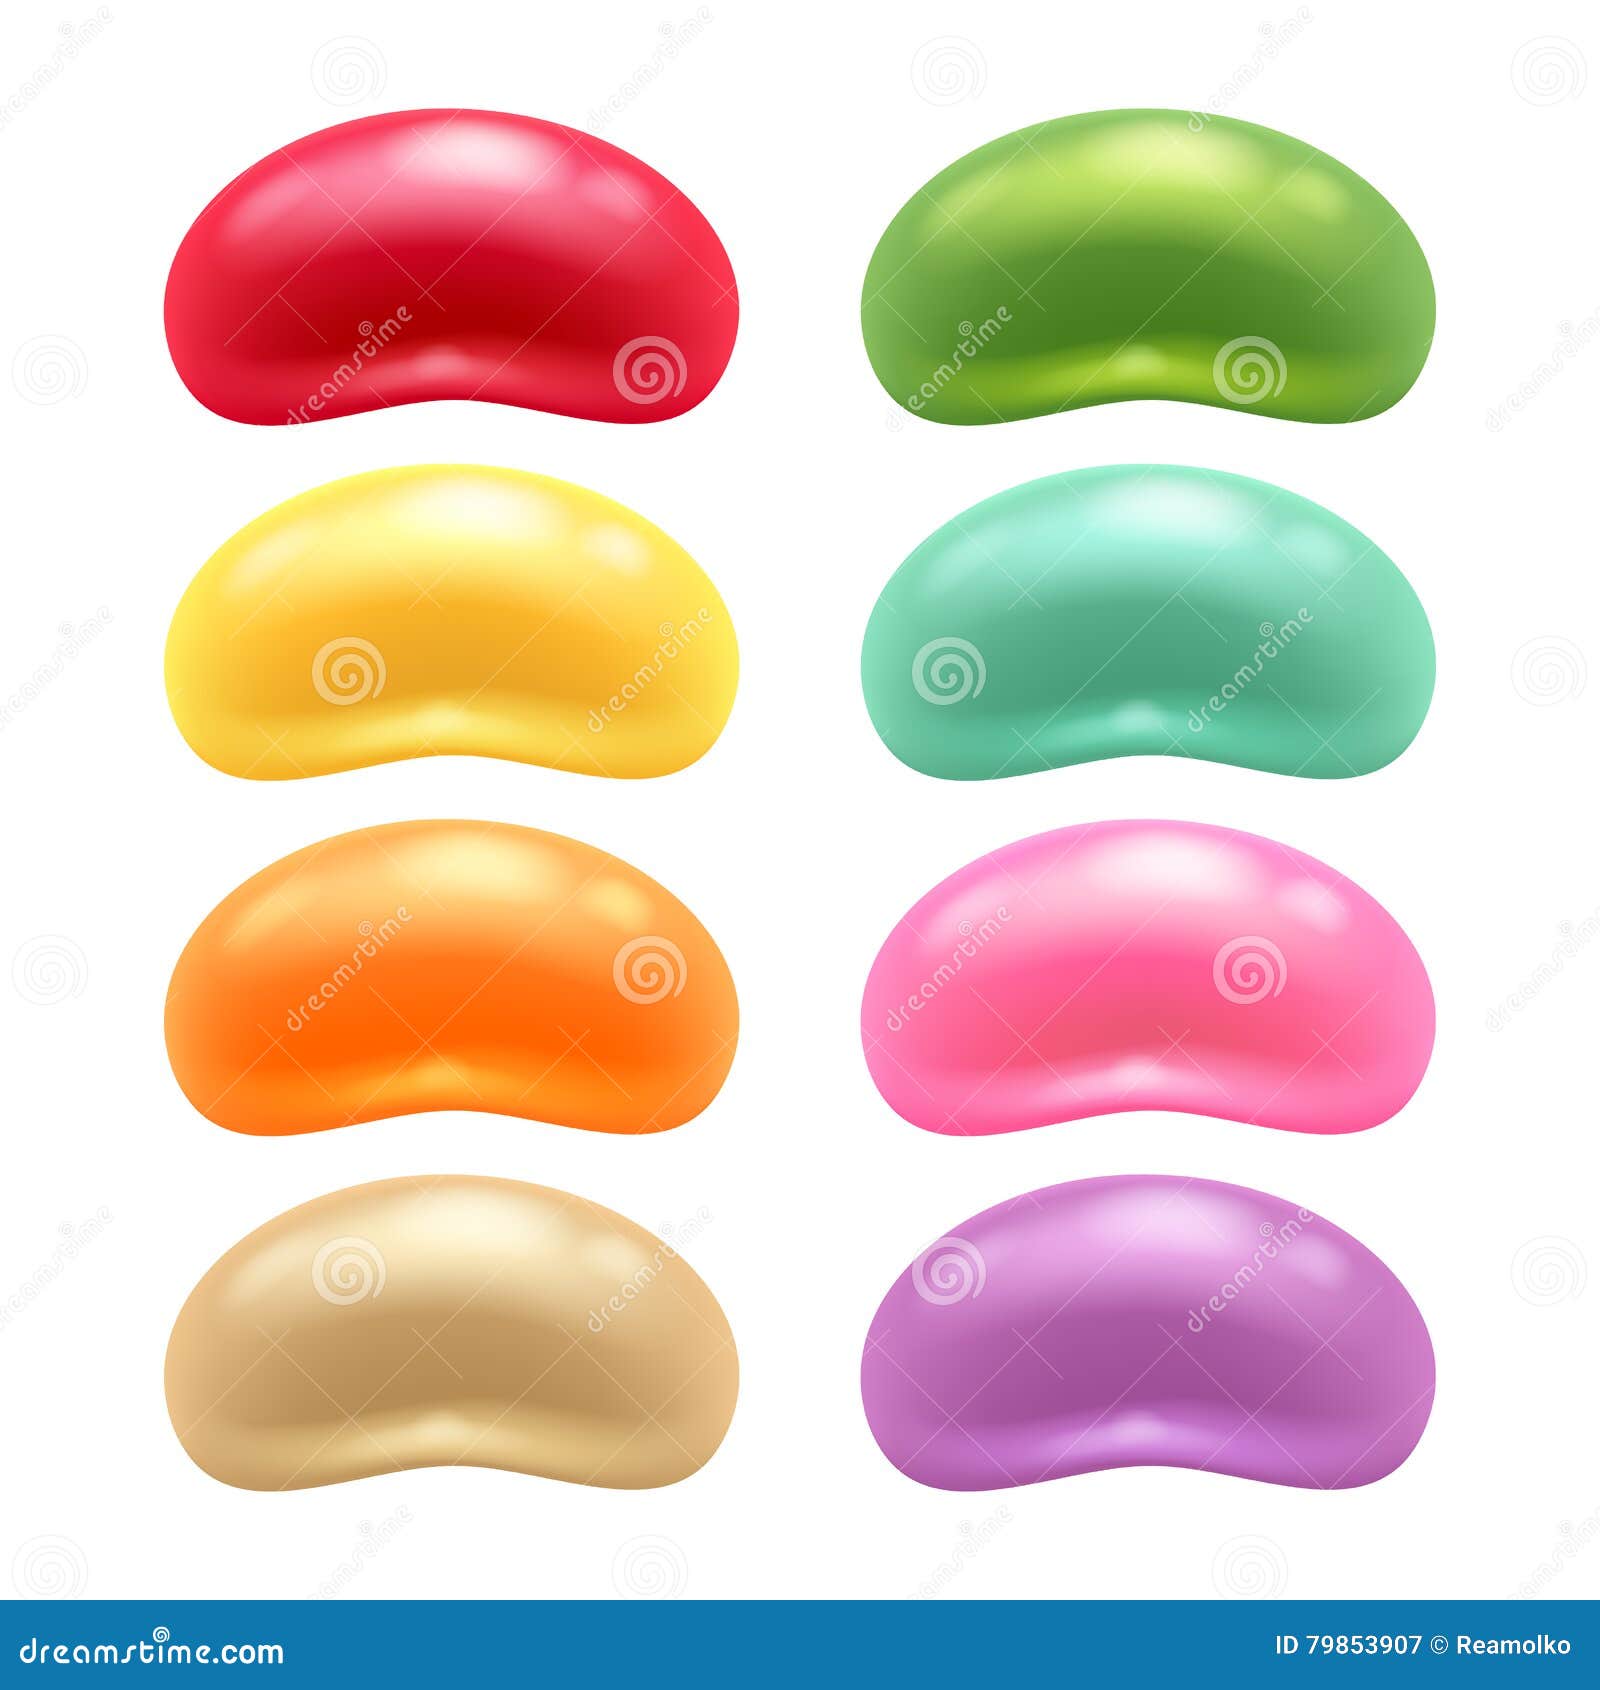 round colorful jelly beans set.